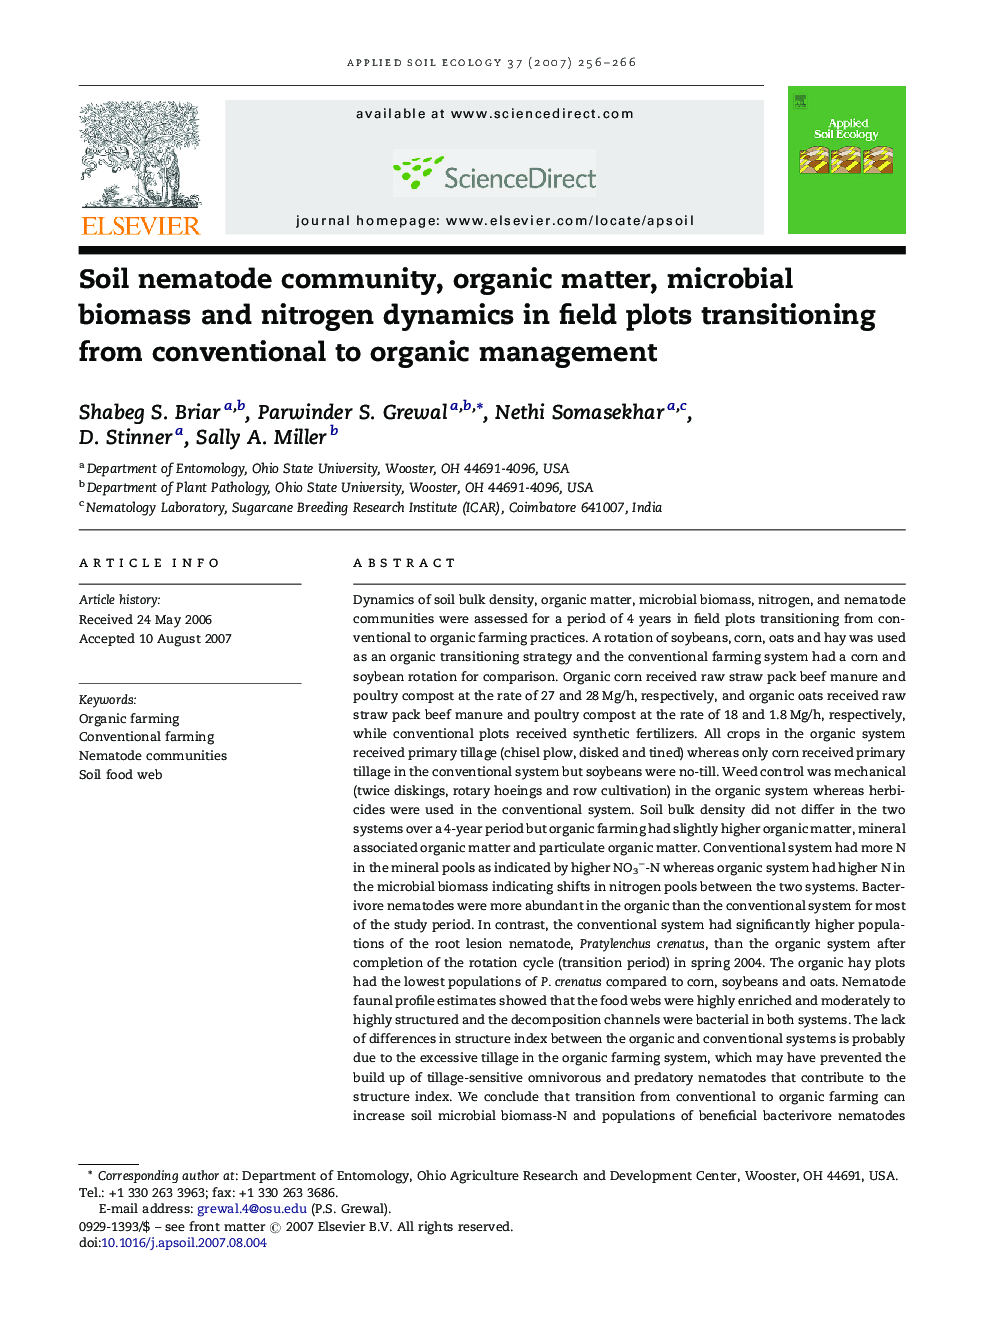 Soil nematode community, organic matter, microbial biomass and nitrogen dynamics in field plots transitioning from conventional to organic management